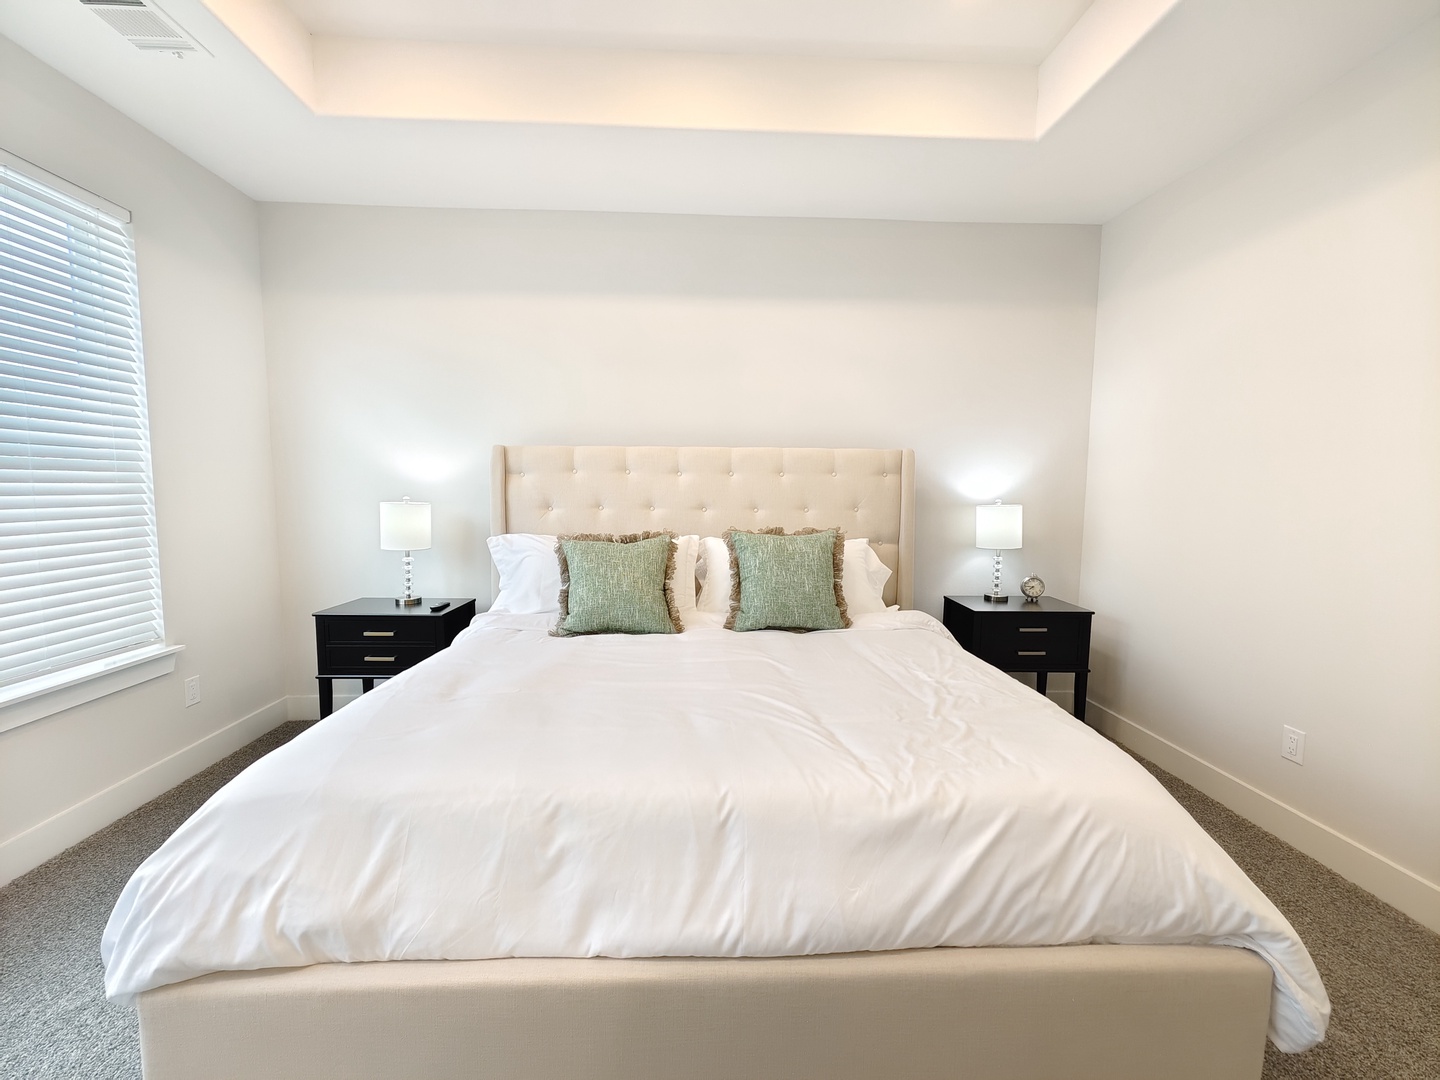 The 3rd-floor king suite boasts a grand ensuite, large closet, & Smart TV